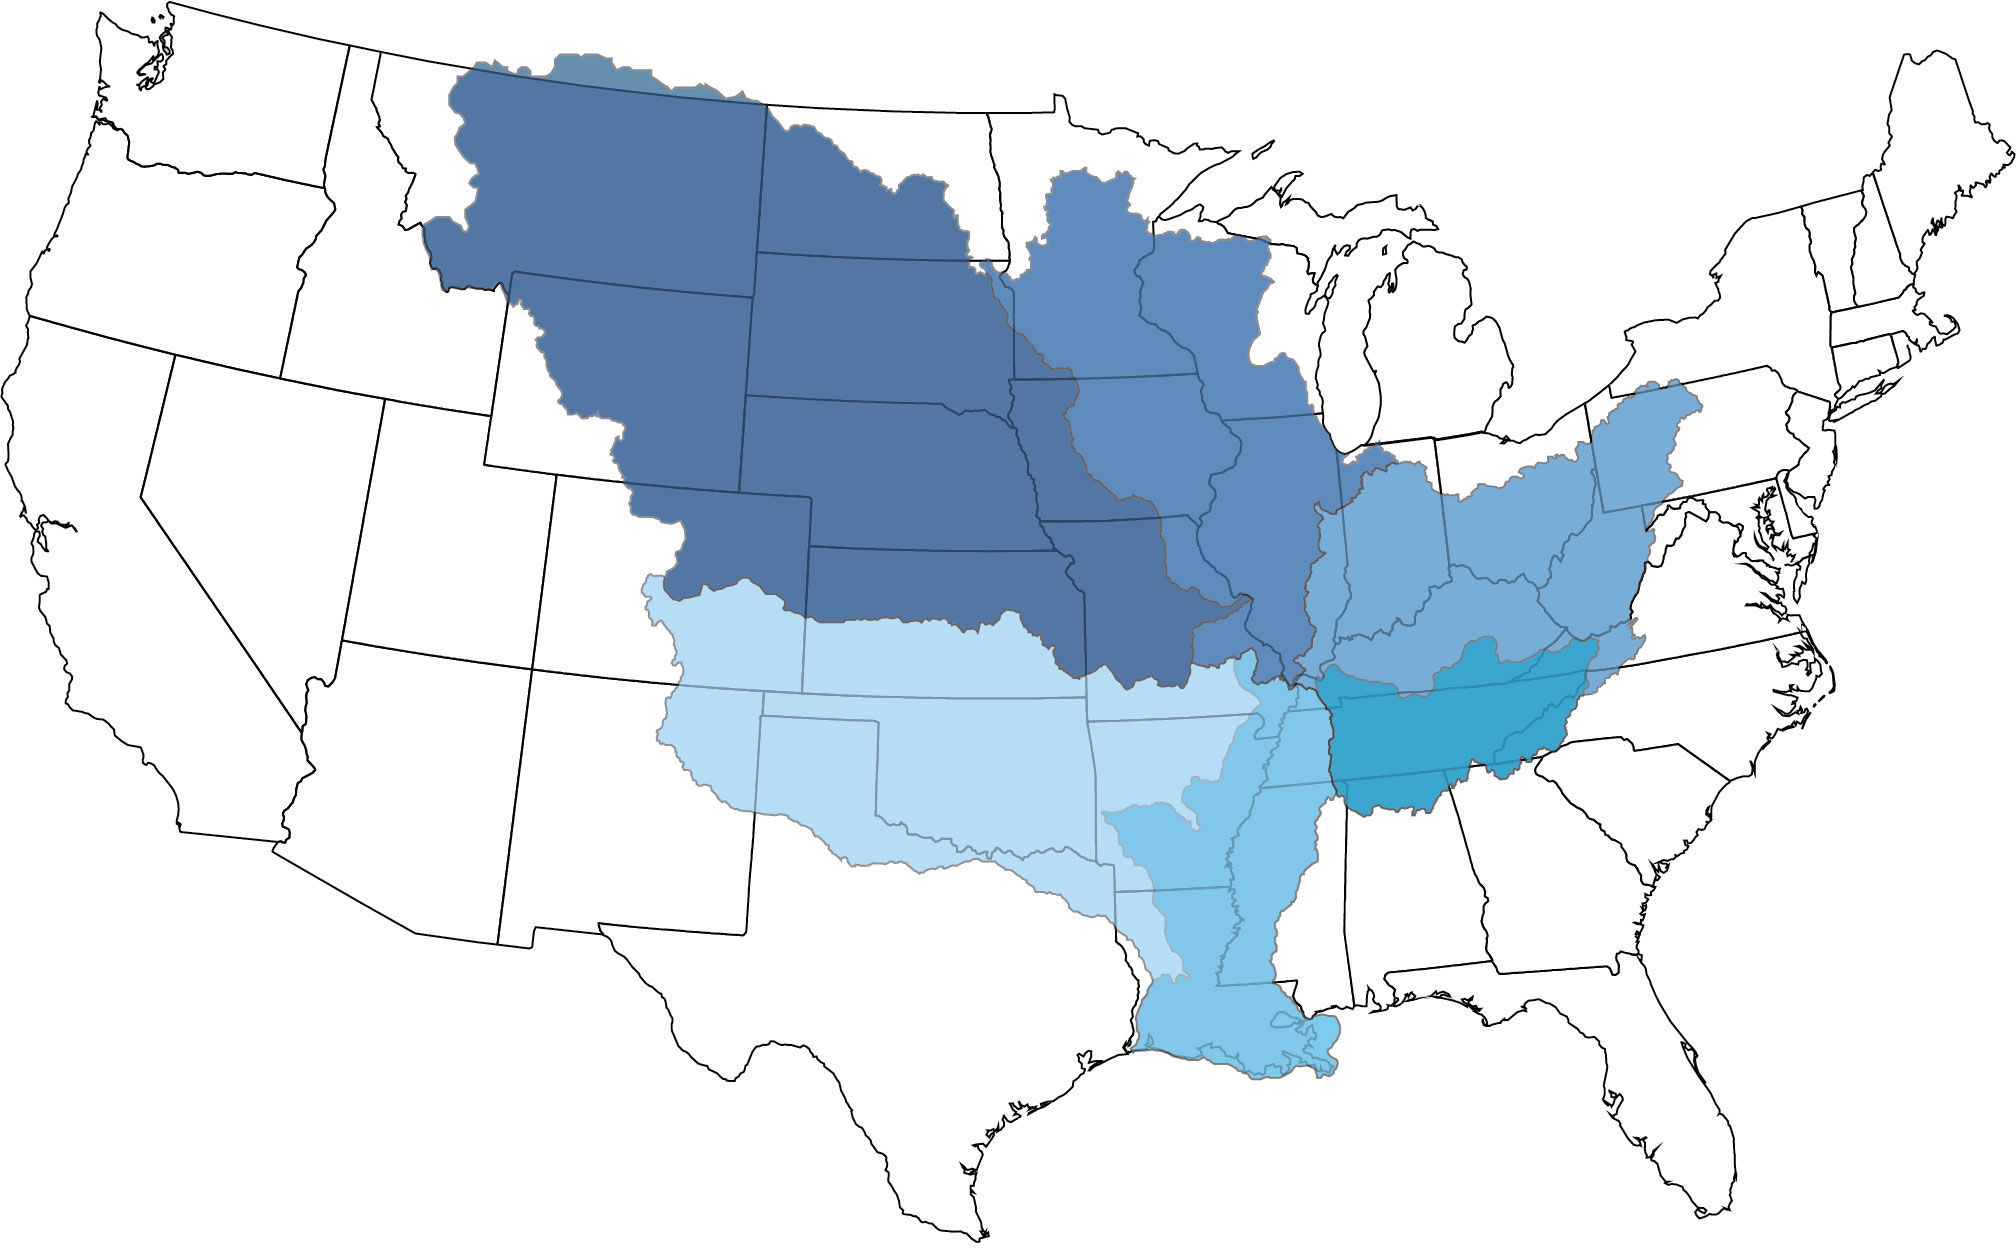 A map of the United States with various shades of blue representing 6 sub-basins in the central and eastern U.S.